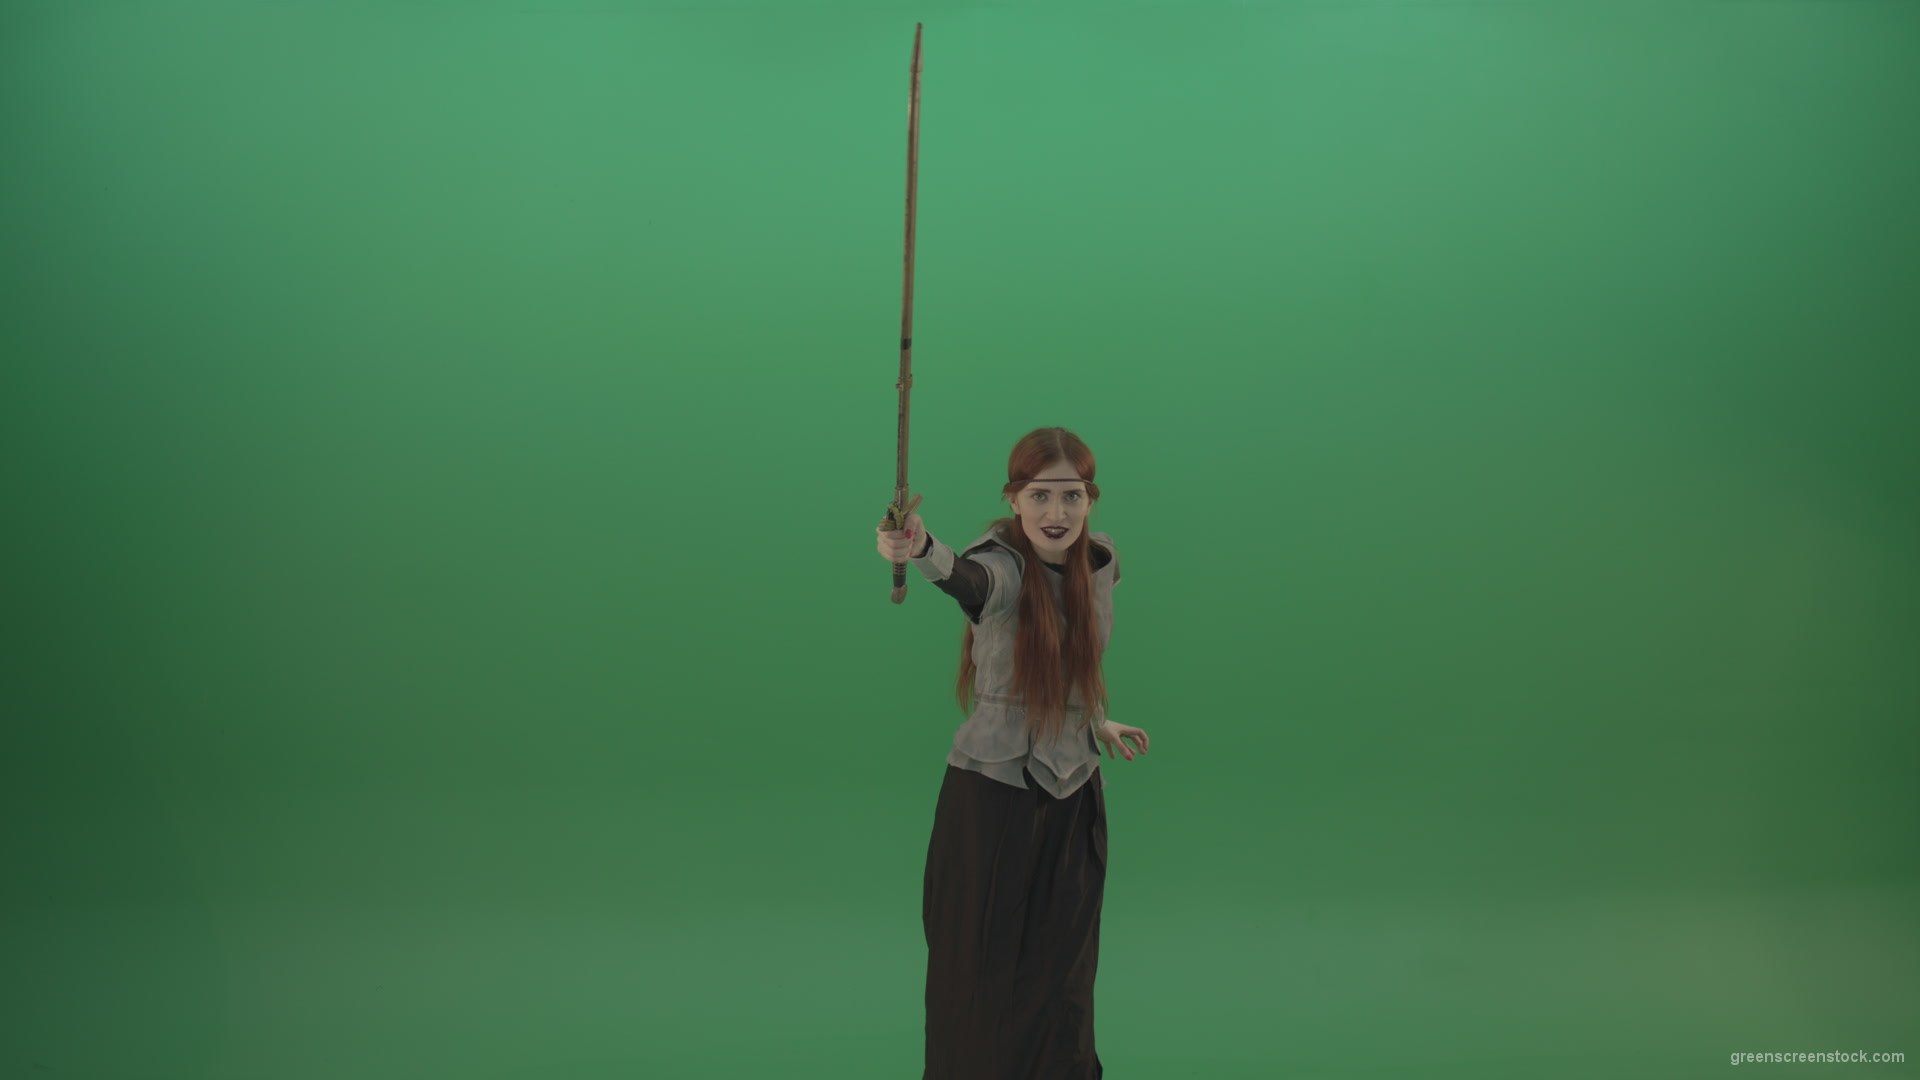 Girl-shouts-her-foes-on-an-offensive-raising-a-sword-up-on-a-green-background_008 Green Screen Stock